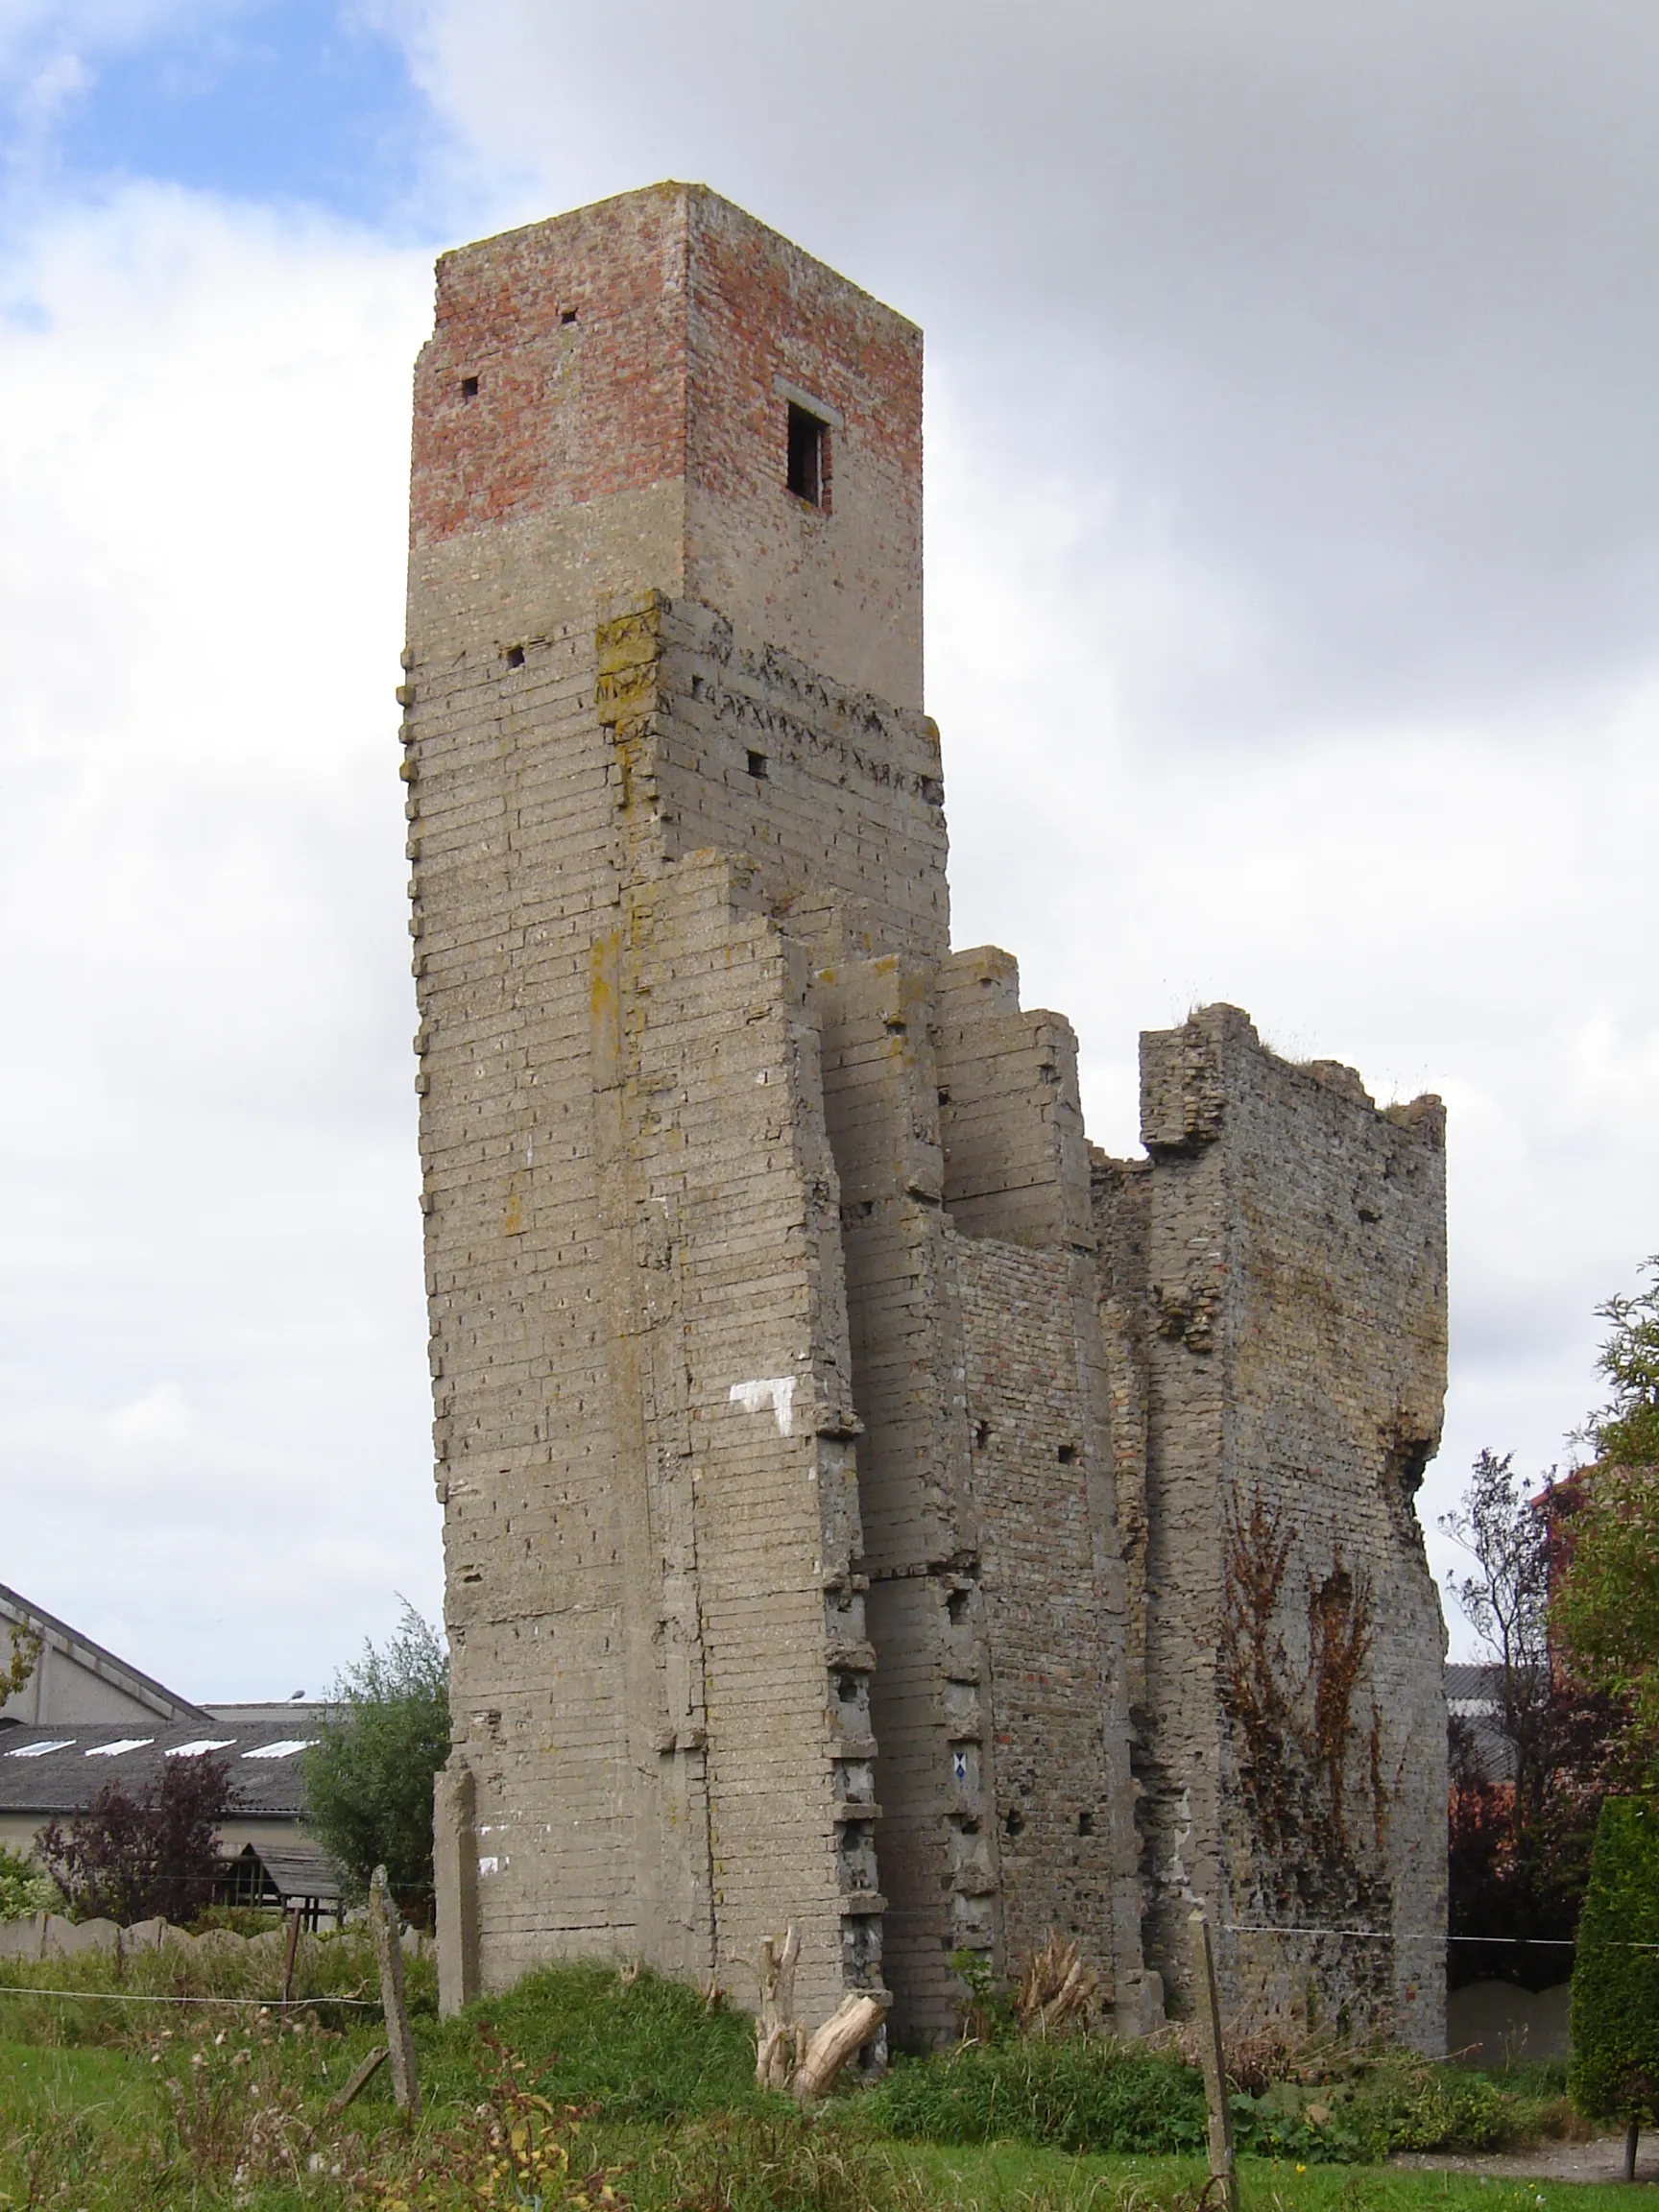 Photo showing: Observation post from World War I, in Pervijze. Built by Belgian army. Added on to by German army in World War II. Pervijze, Diksmuide, West Flanders, Belgium